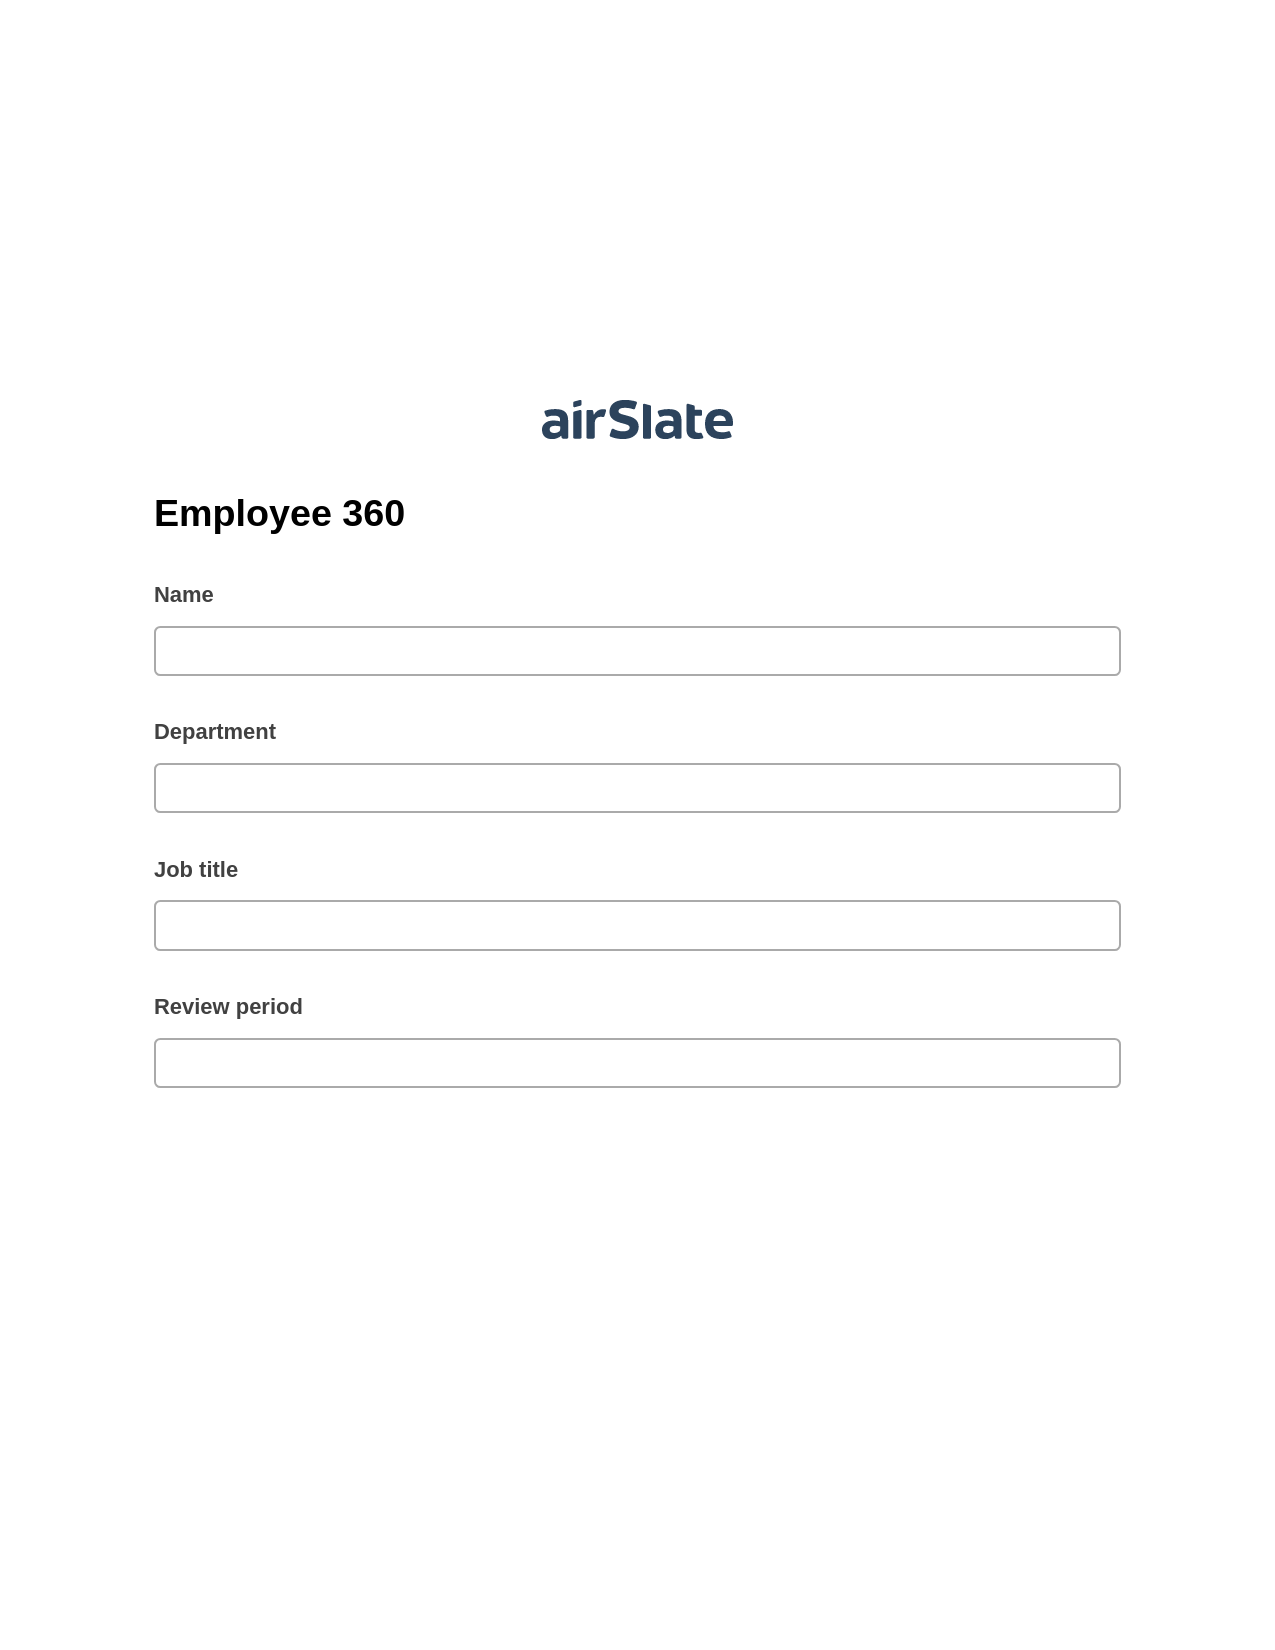 Employee 360 Pre-fill from Excel Spreadsheet Bot, Export to MS Dynamics 365 Bot, Post-finish Document Bot